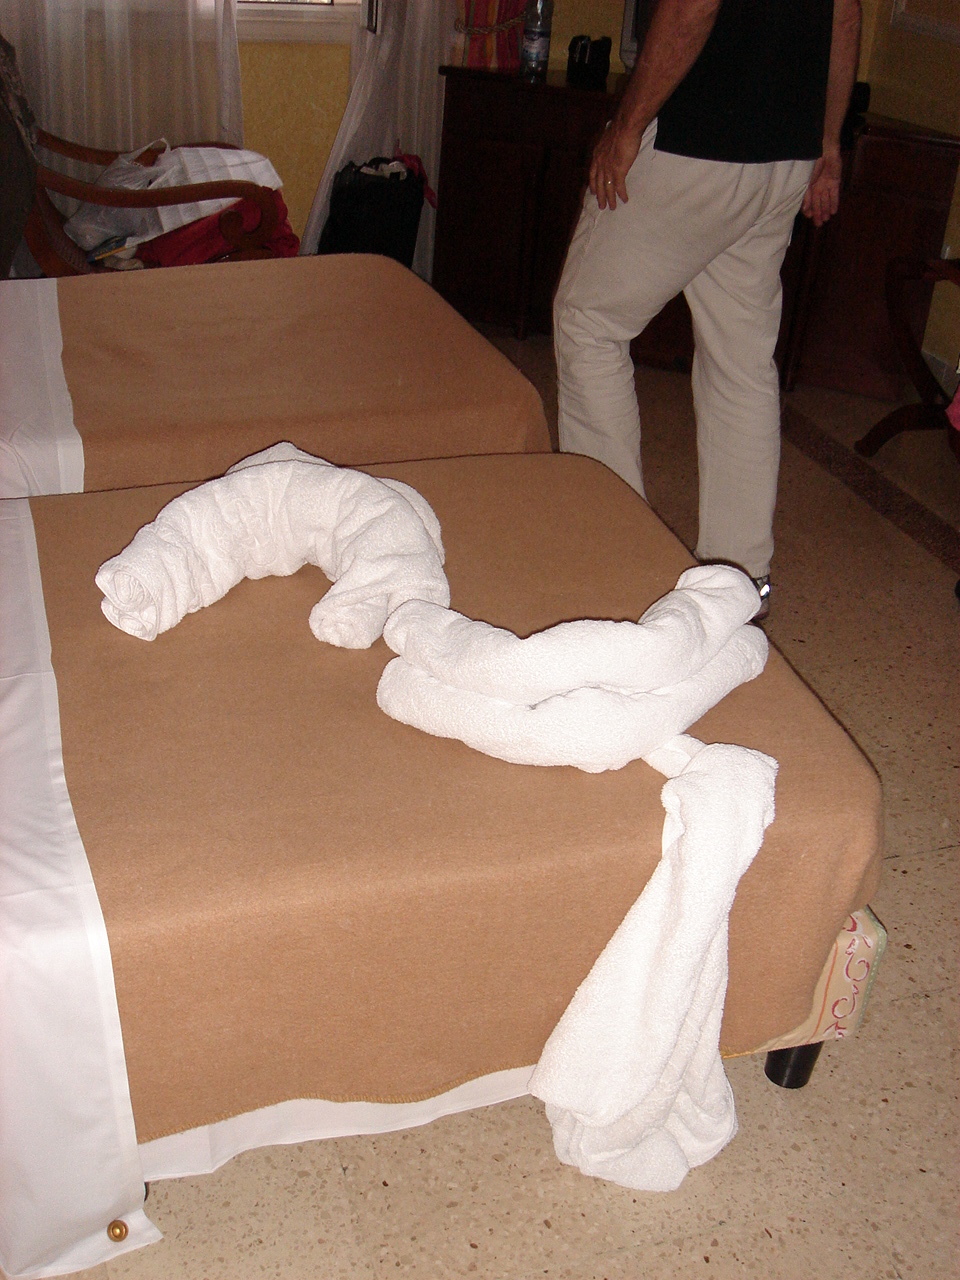 towel-sculpture made by our hotel maids